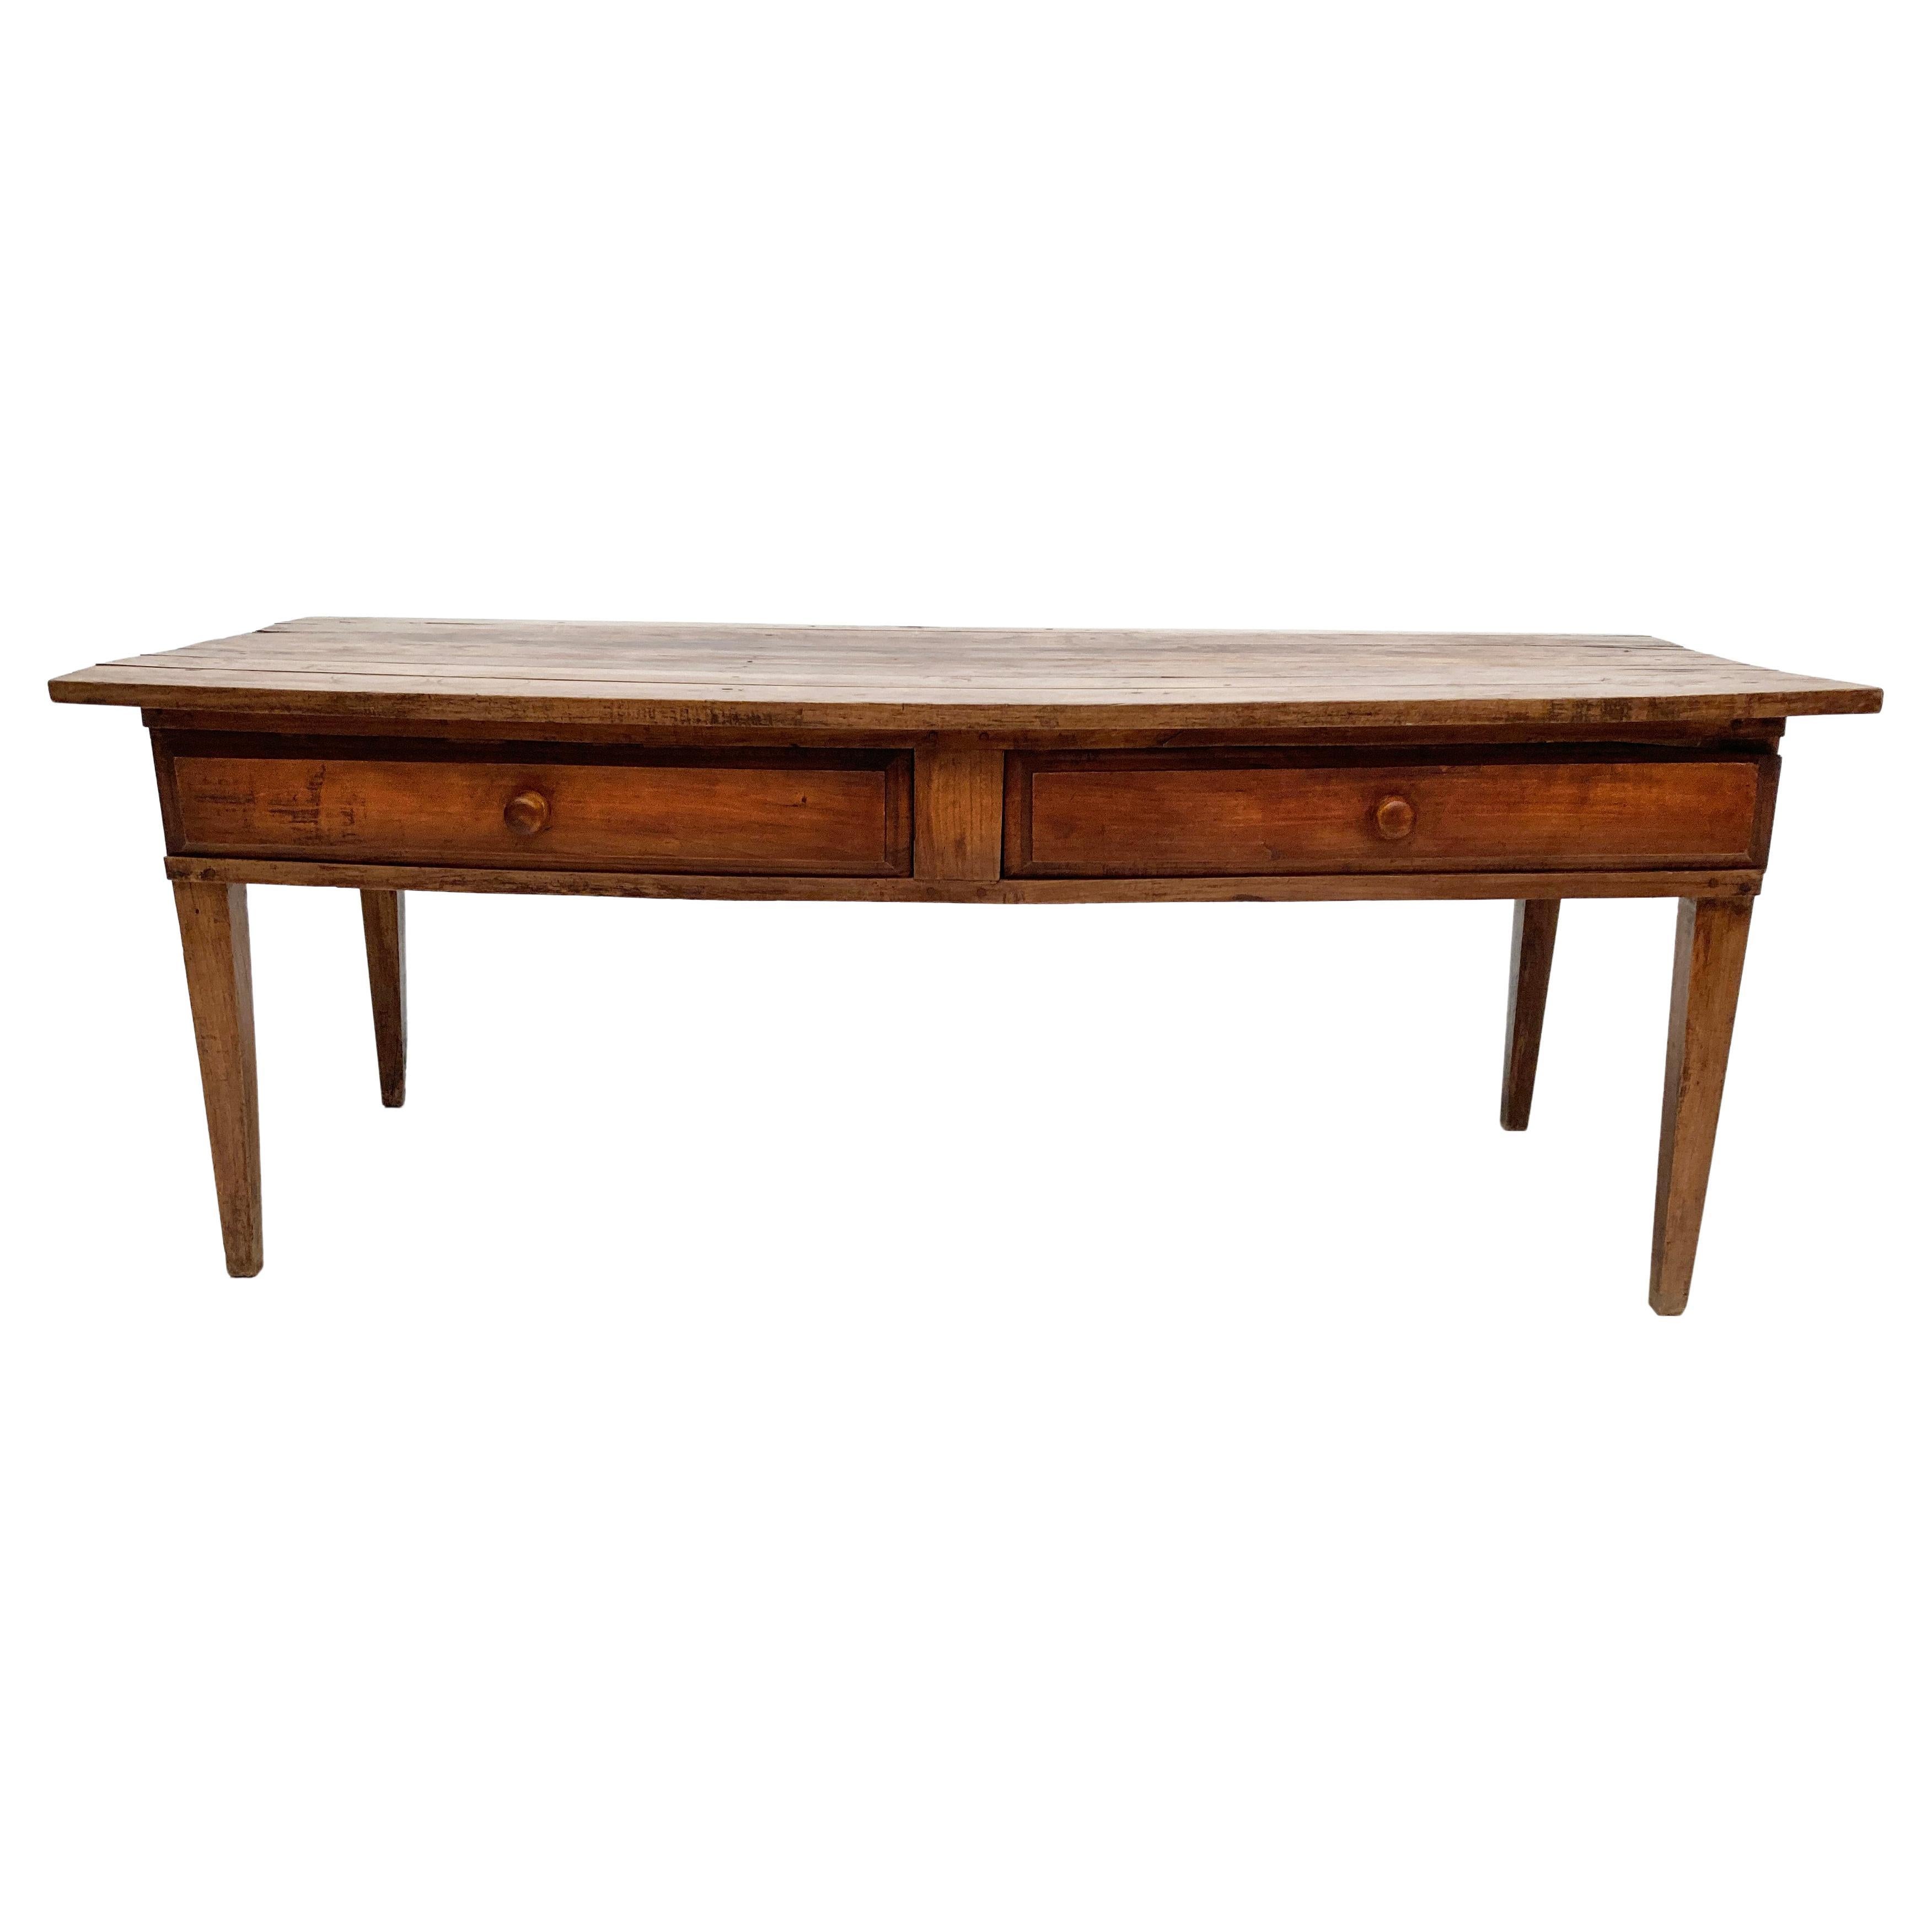 19th Century French Hand-crafted Pétrin Table 